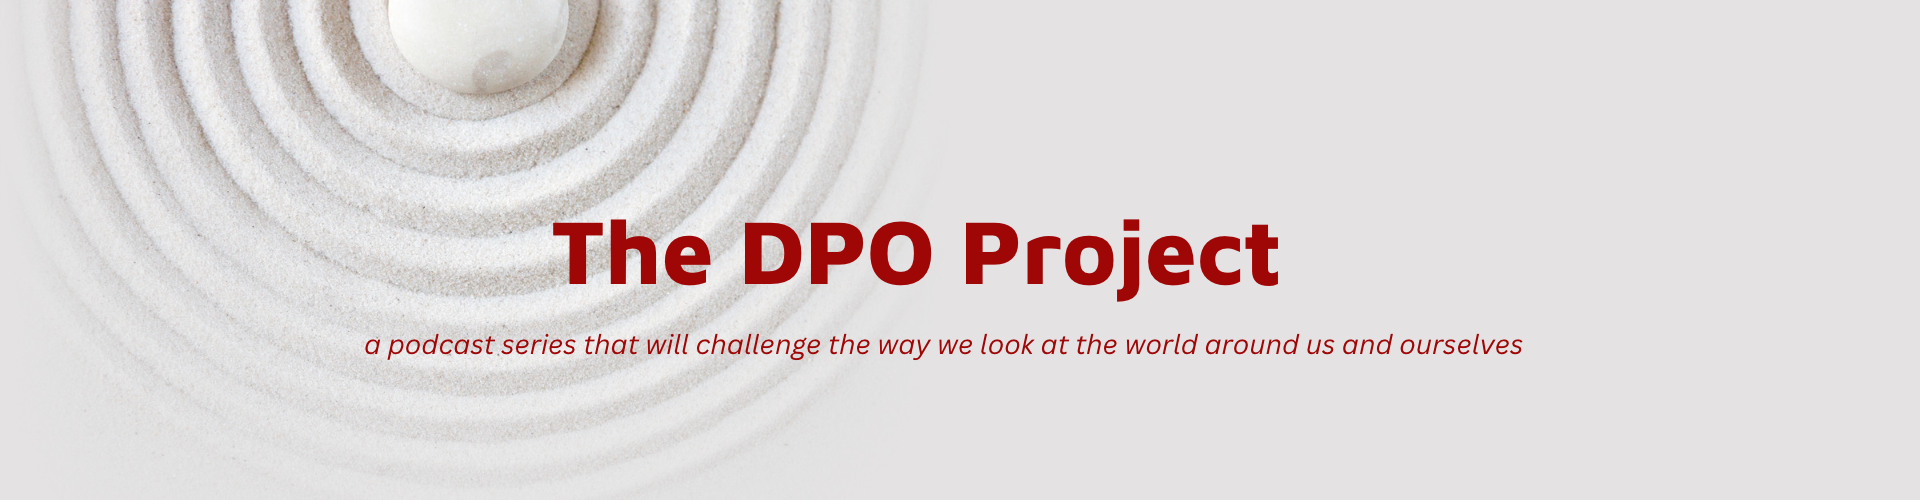 The DPO Project